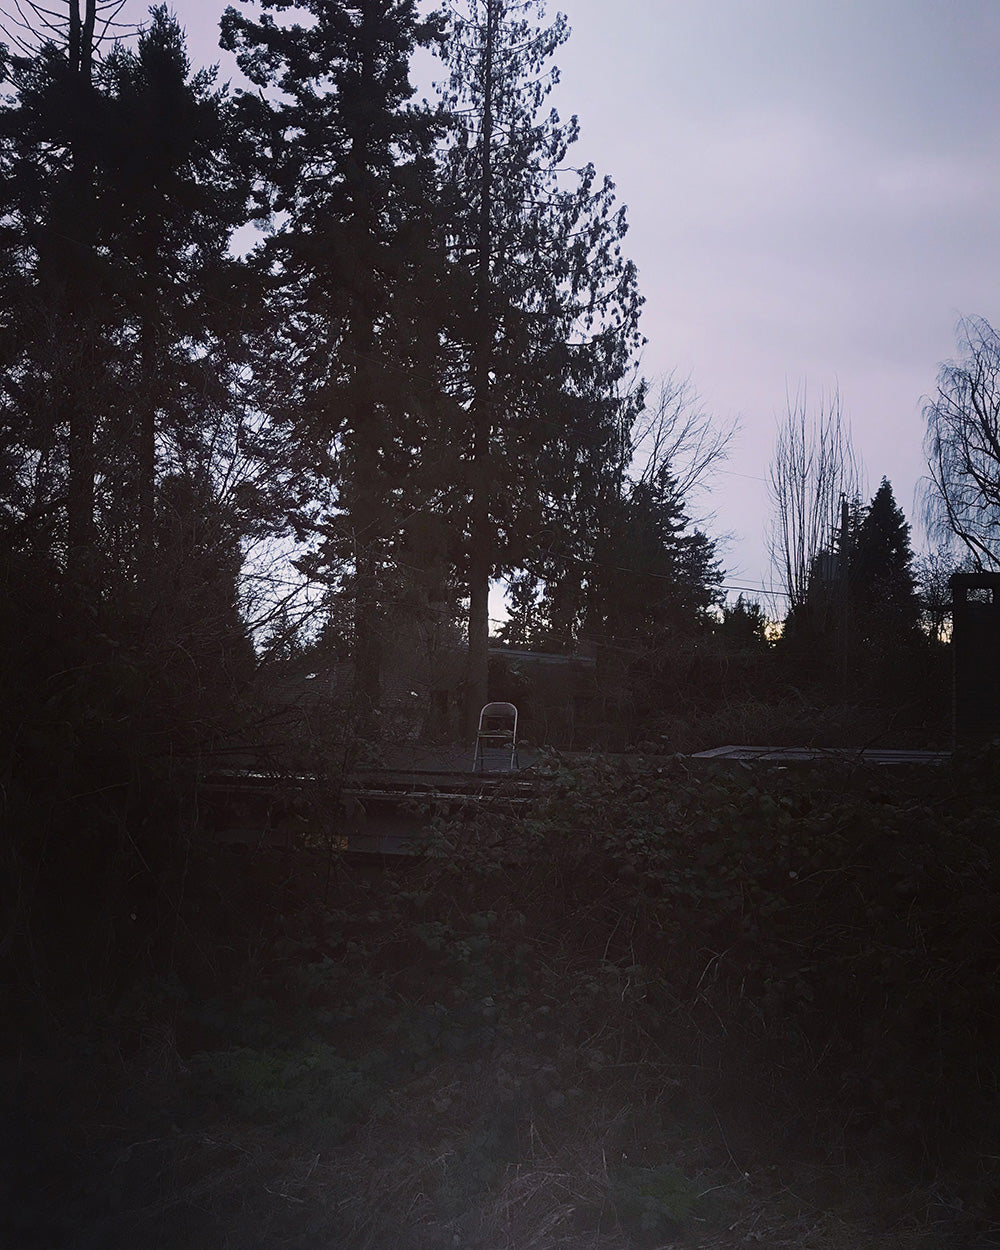 SPITGAN WEBZINE #3 Photo 13. Photo from the Arbutus Street bike path of an abandoned chair on a old wooden garage roof twilight Vancouver, BC. Random weirdness